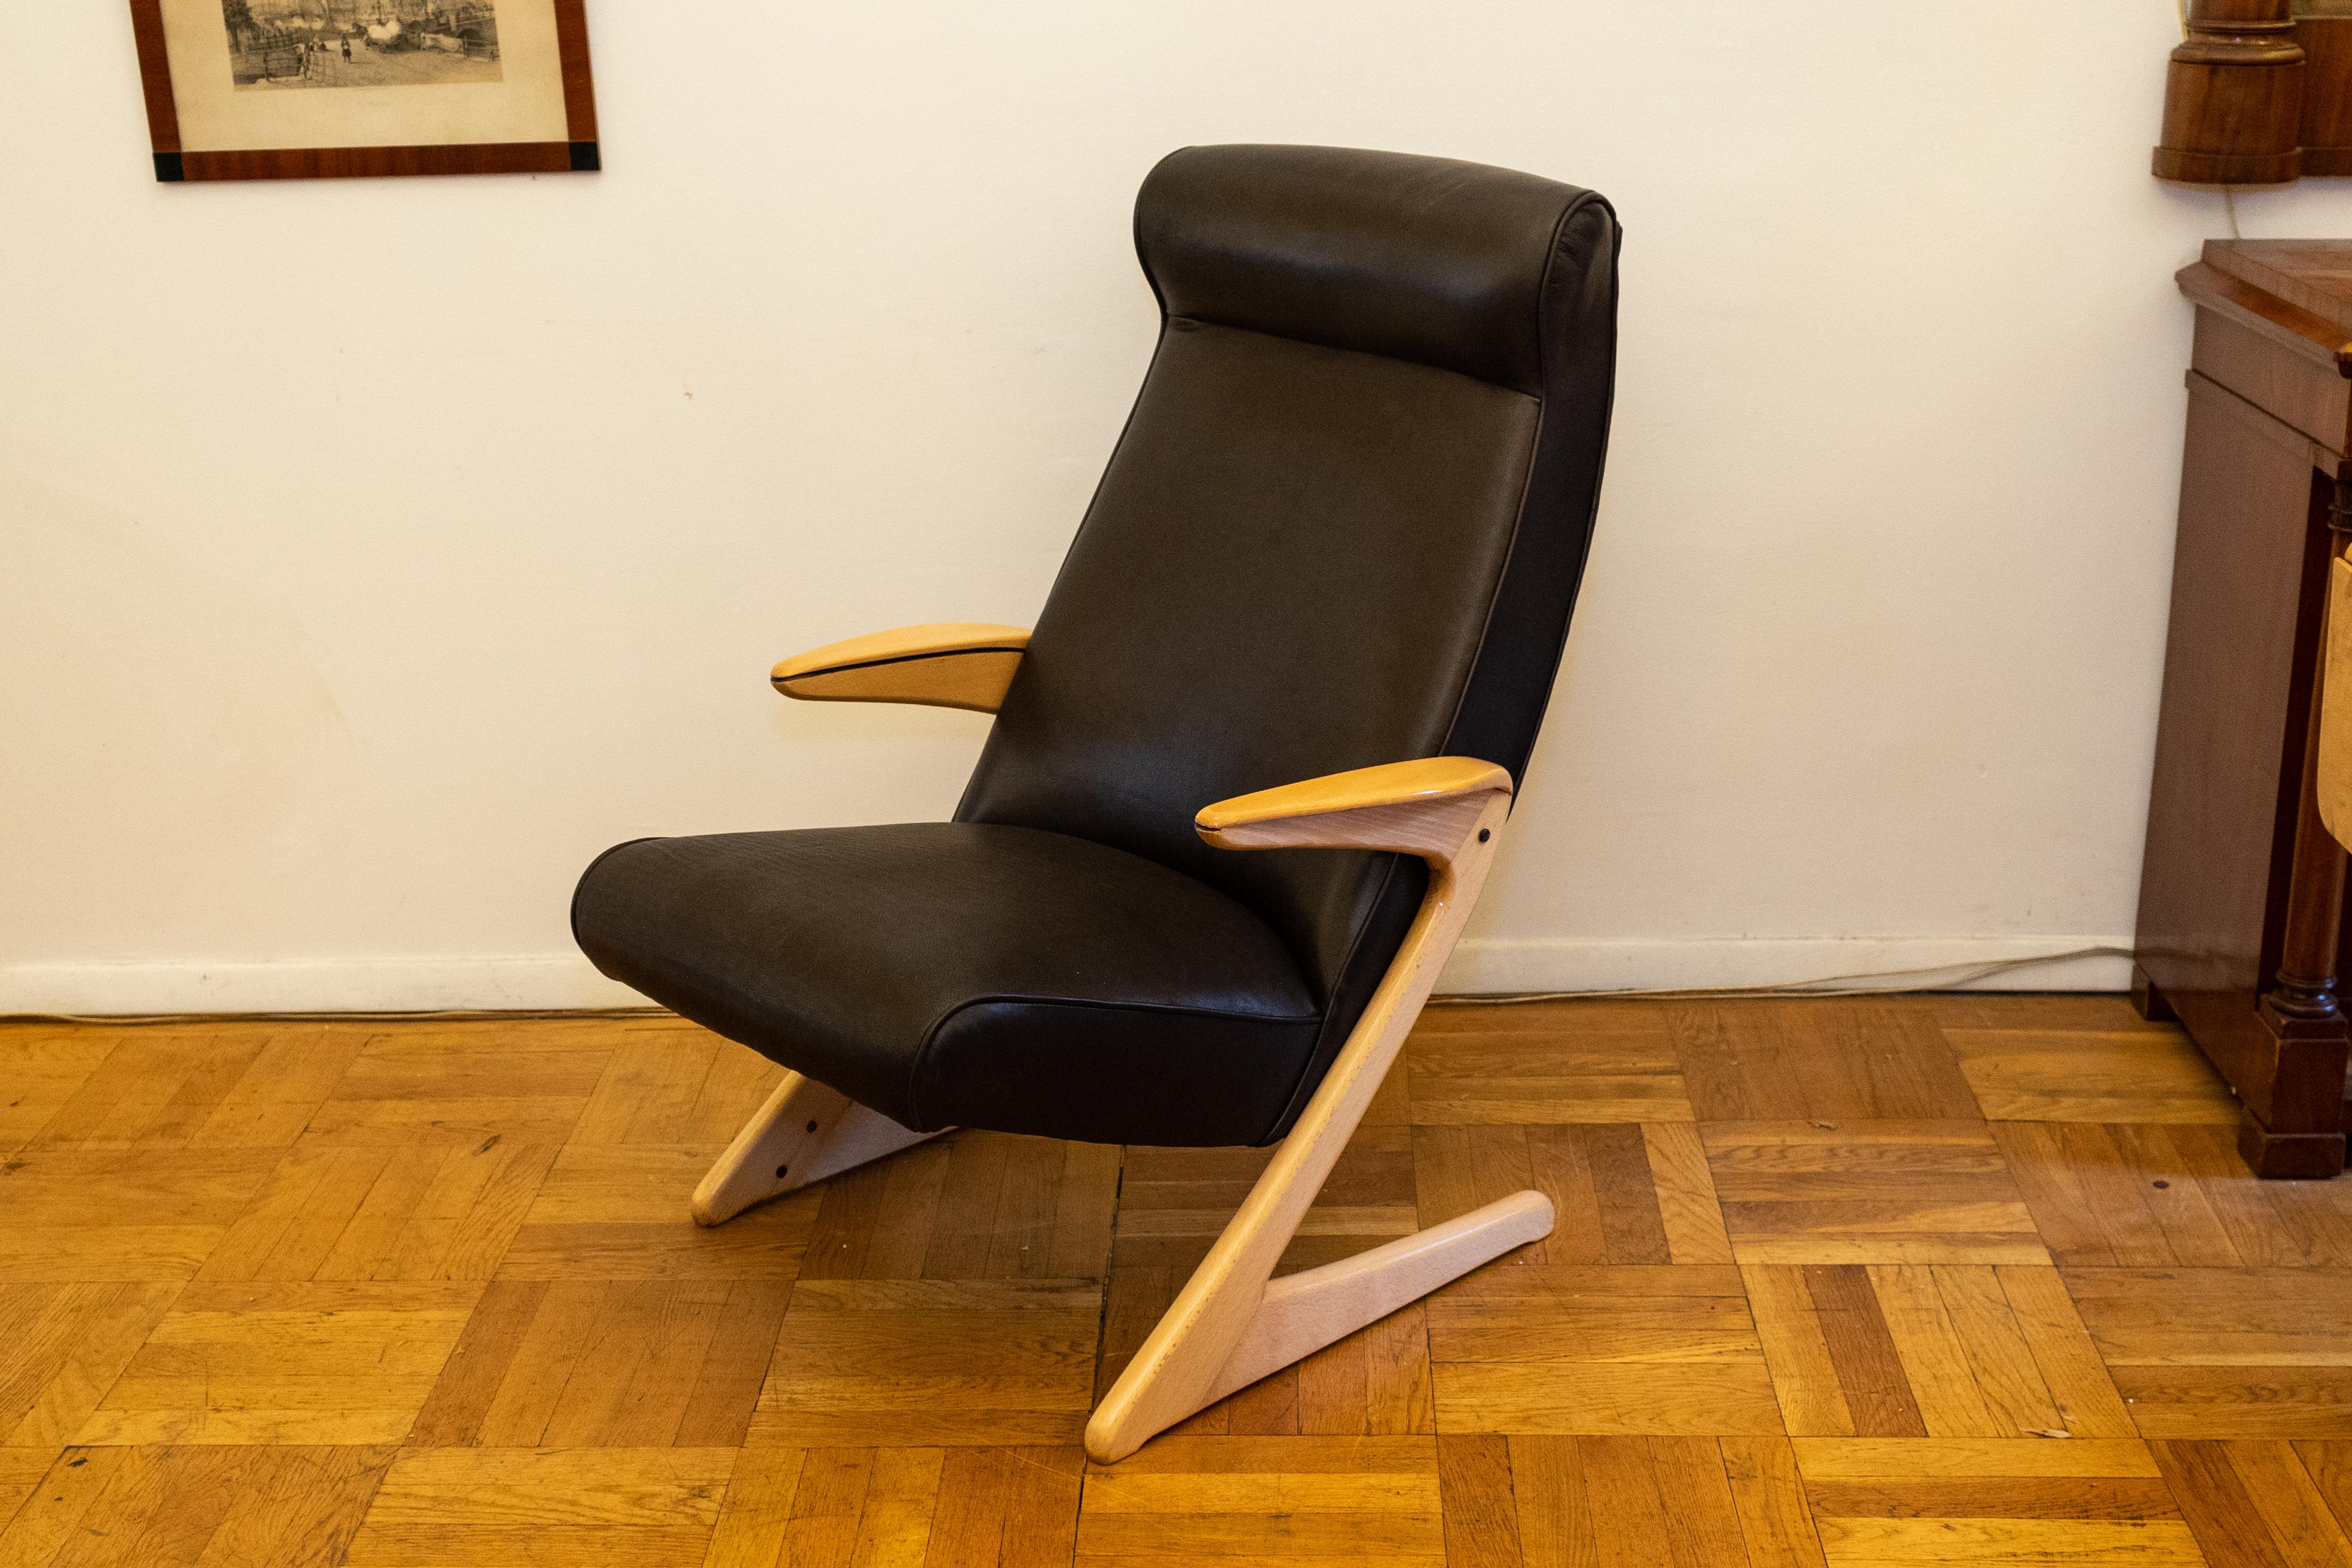 A comfortable chair with a stunning minimalist design and a buttery soft leather seat. The arms and legs of this chair are bolted directly to the frame of the seat and back which conceal the structural supports, giving this chair an out of this